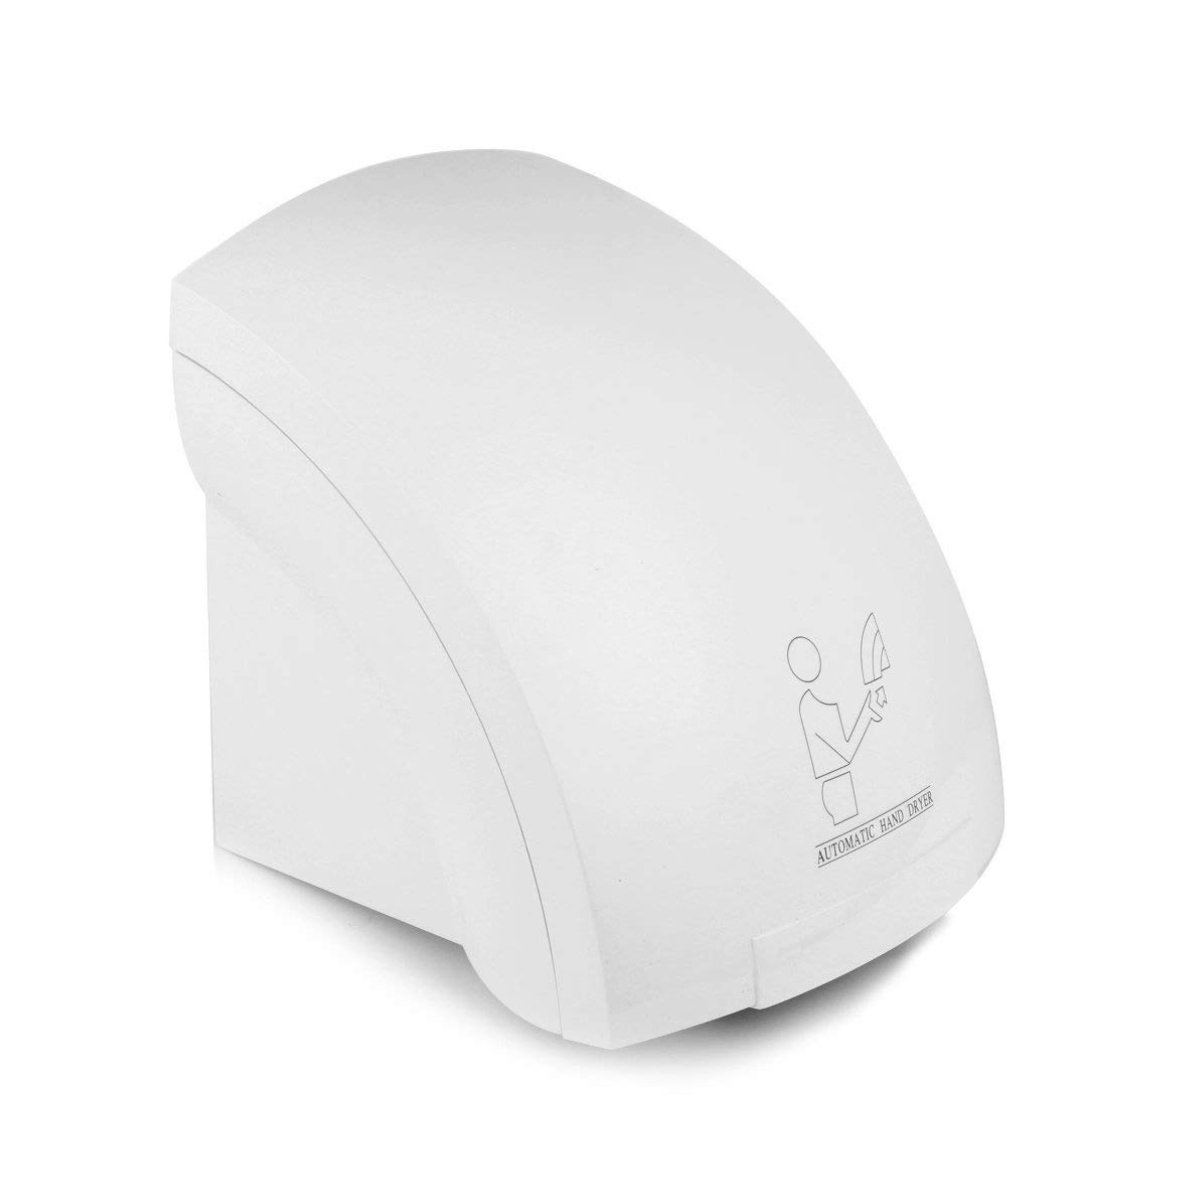 Buy Automatic Hot Wind Hand Dryer White - CS 15 | Shop at Supply Master Accra, Ghana Dryers & Dispensers Buy Tools hardware Building materials